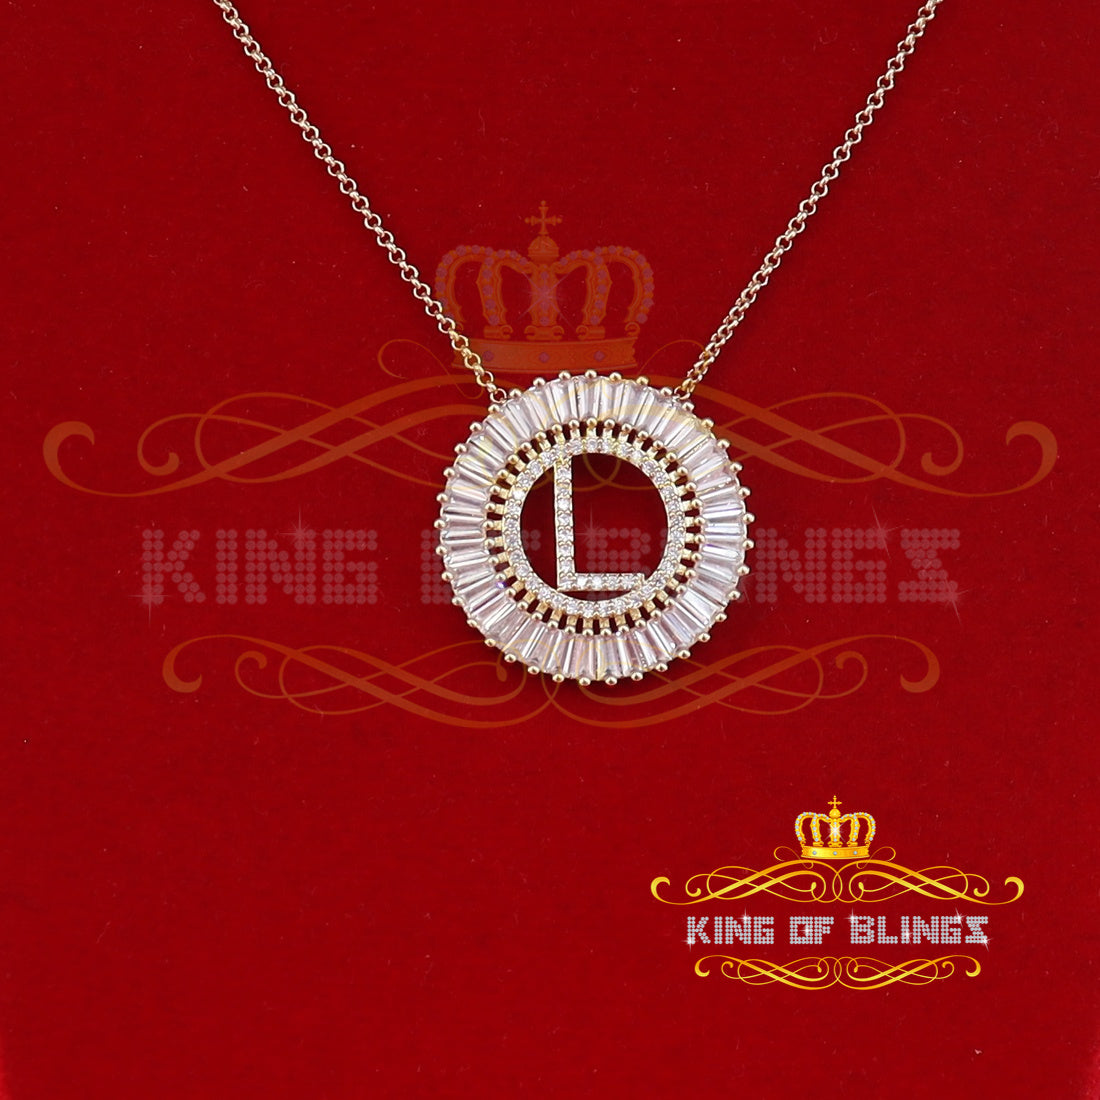 Woman's Necklace Circle Hollow Out Cubic Zirconia in Yellow Metal Letter Pendant KING OF BLINGS